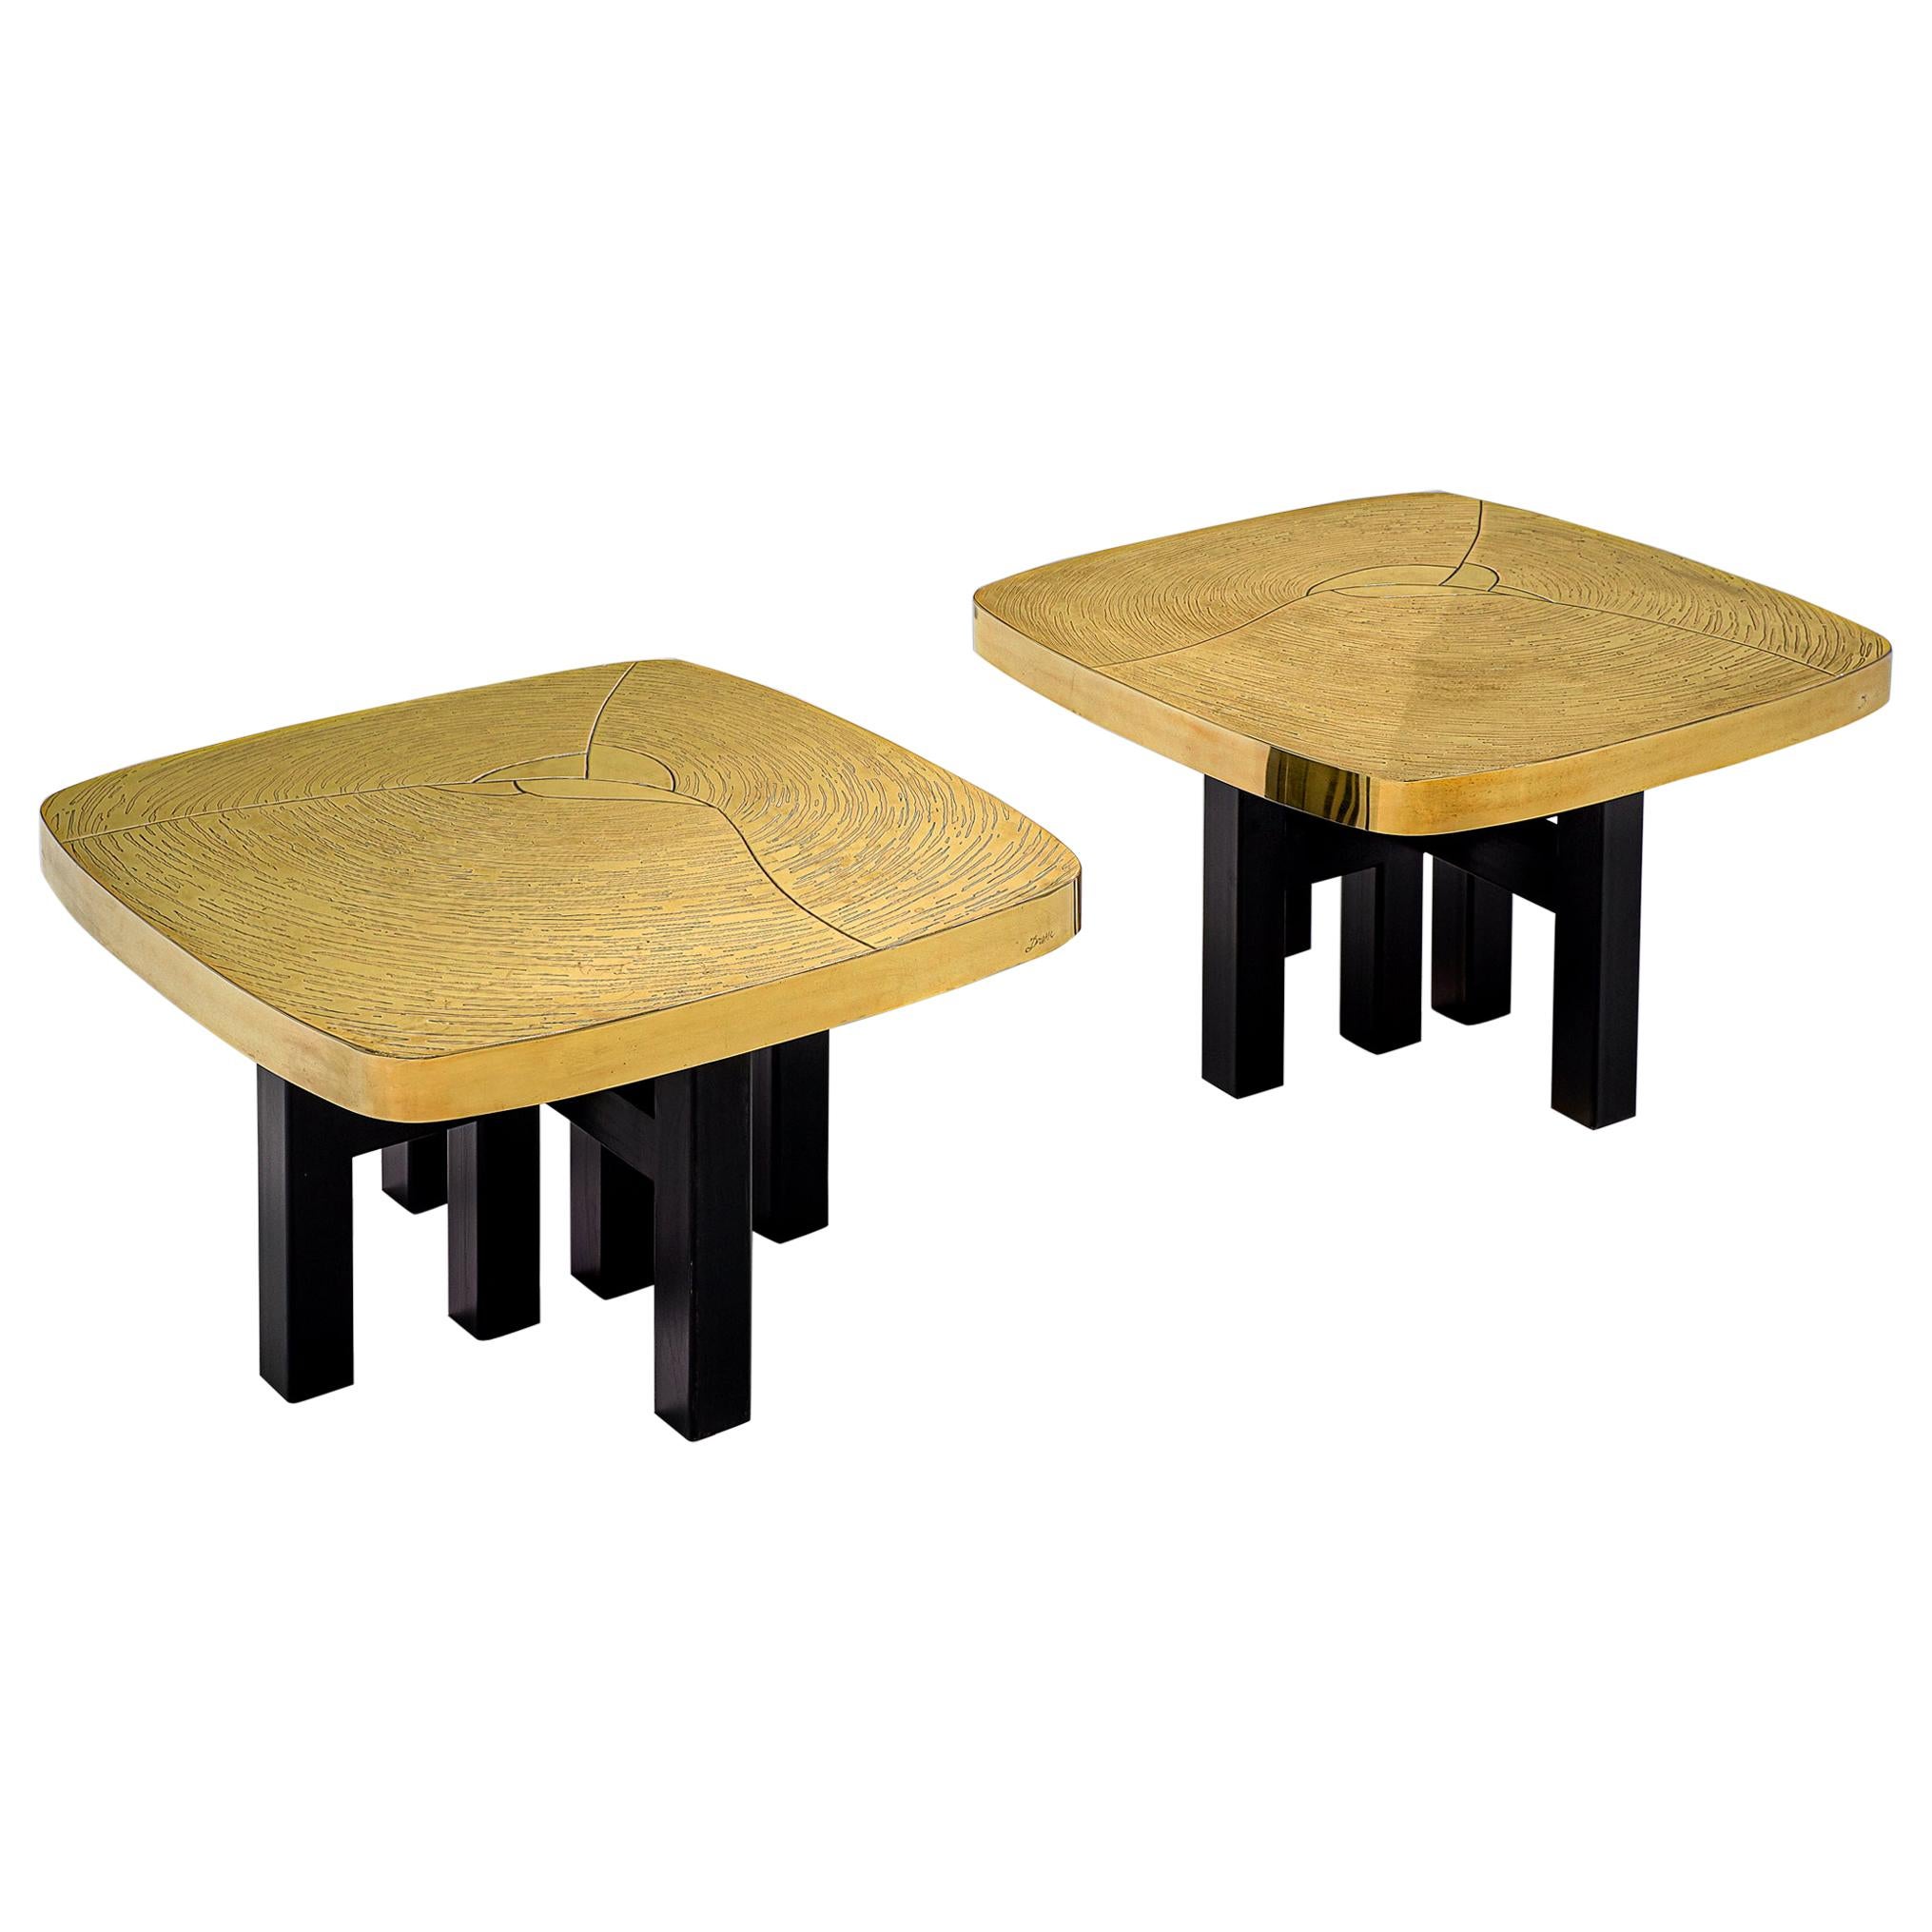 Rare Pair of Jean Claude Dresse Side Tables in Etched Brass.